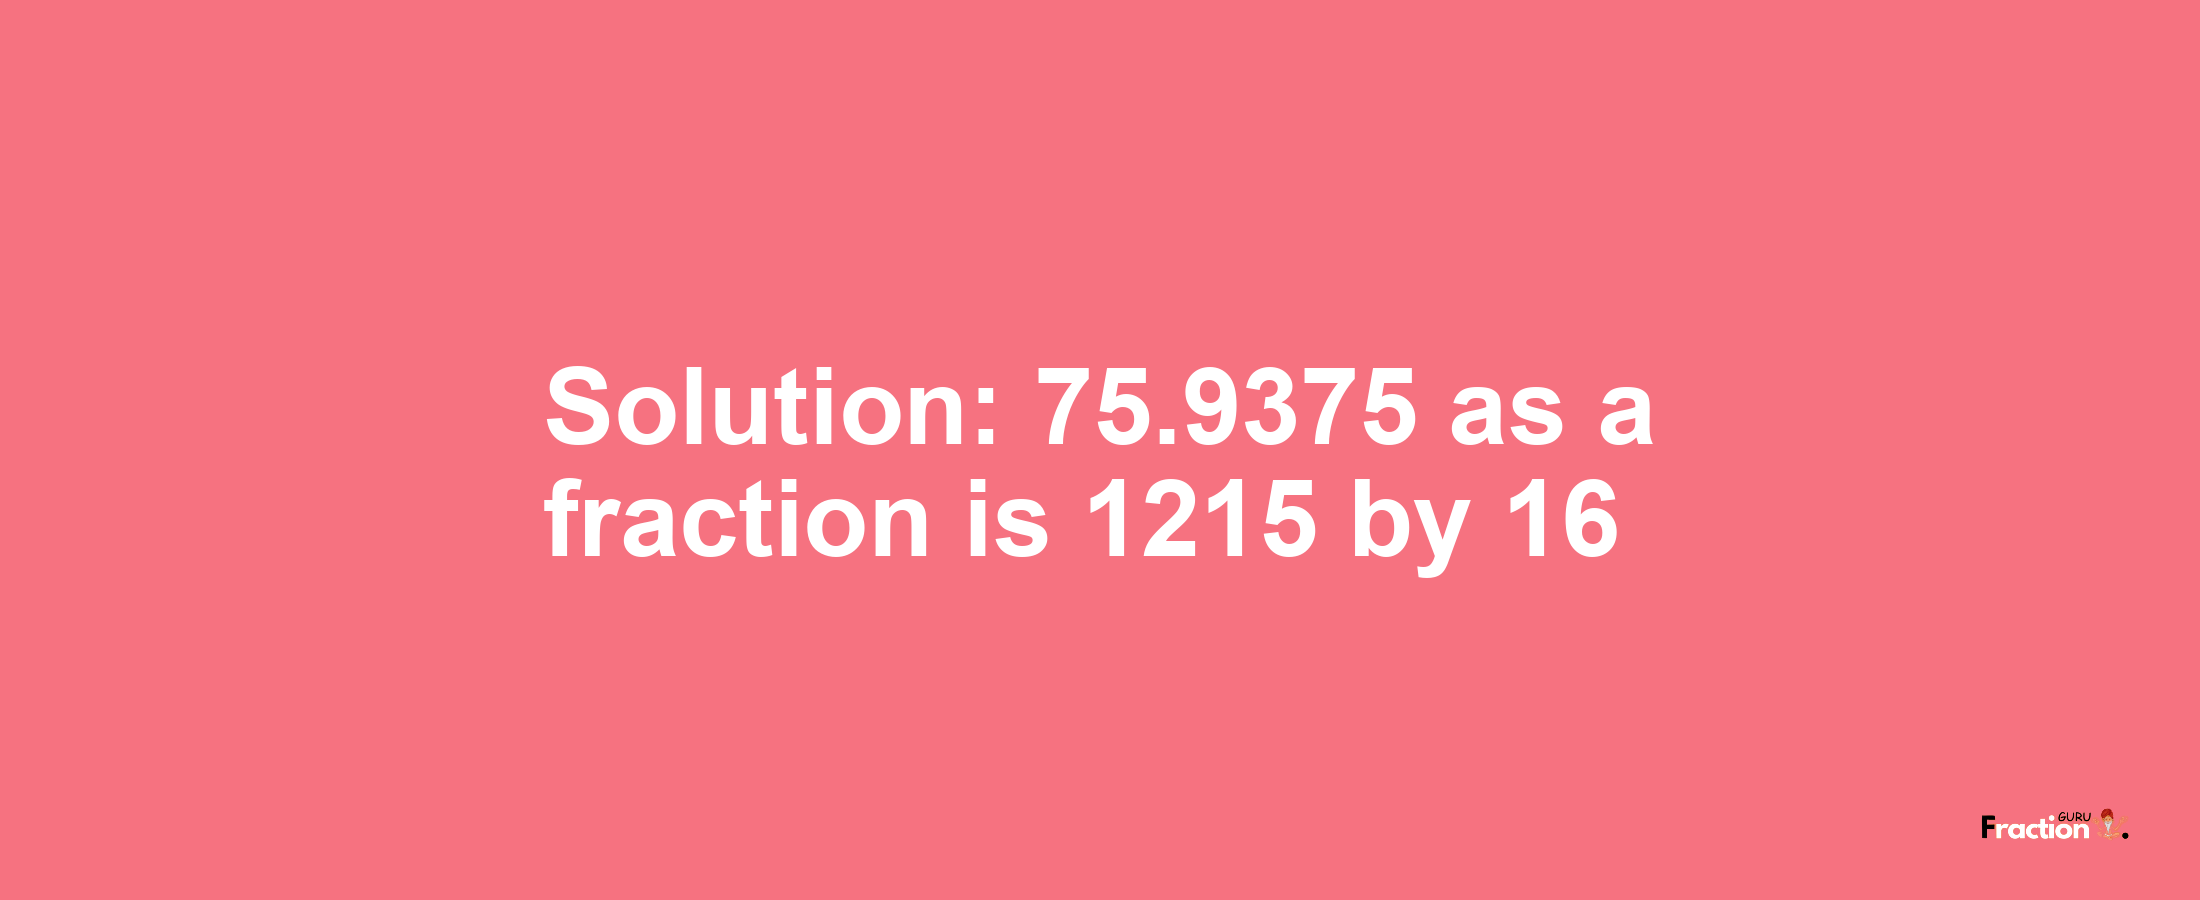 Solution:75.9375 as a fraction is 1215/16